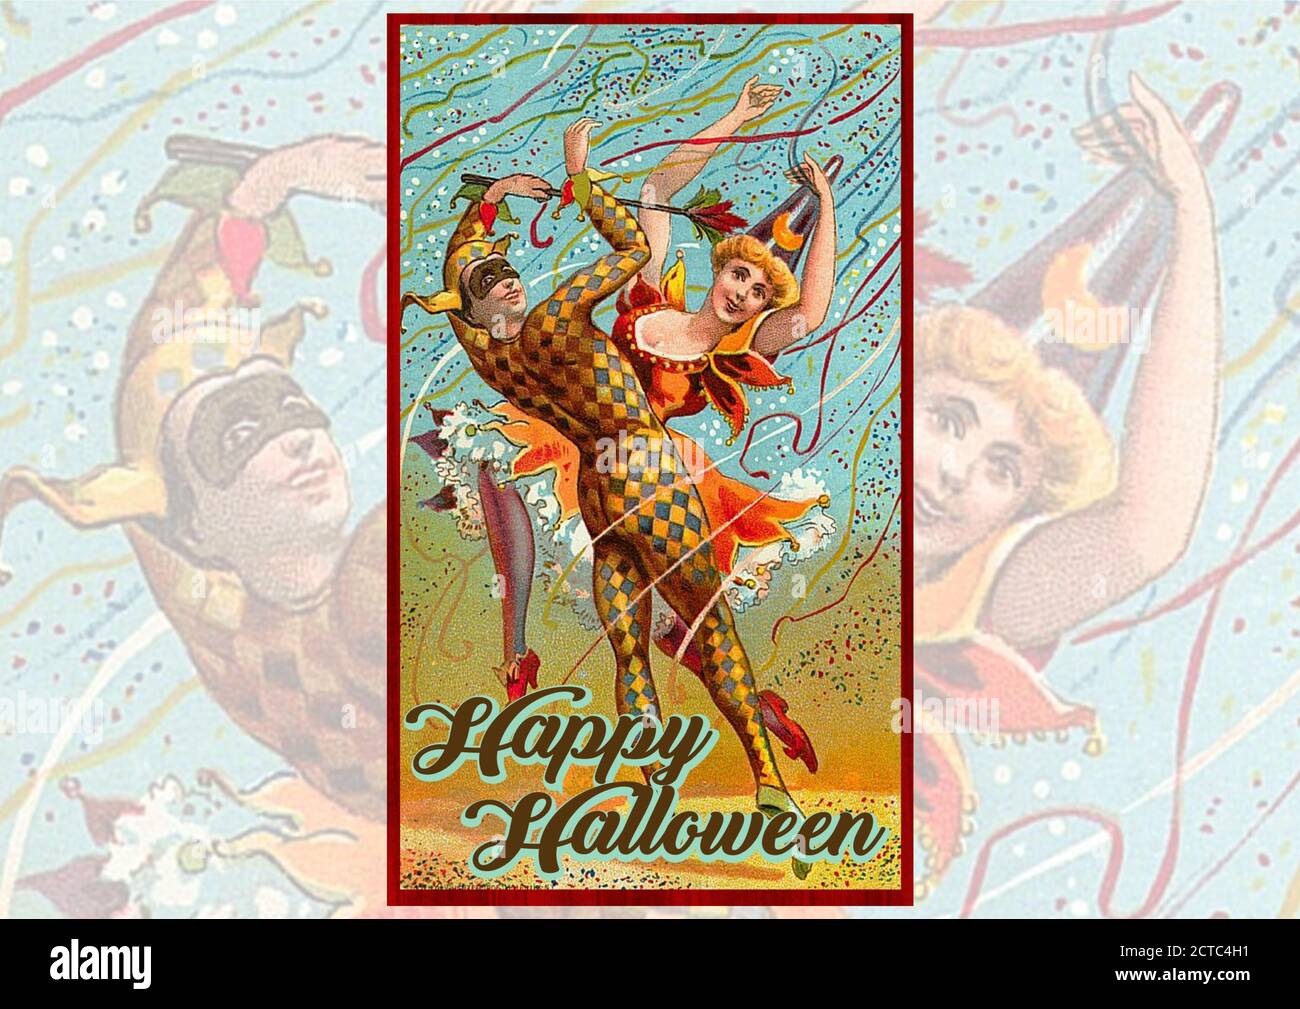 Vintage Halloween greetings - Dancing Halloween Harlequin with copy space either side to just add text Stock Photo